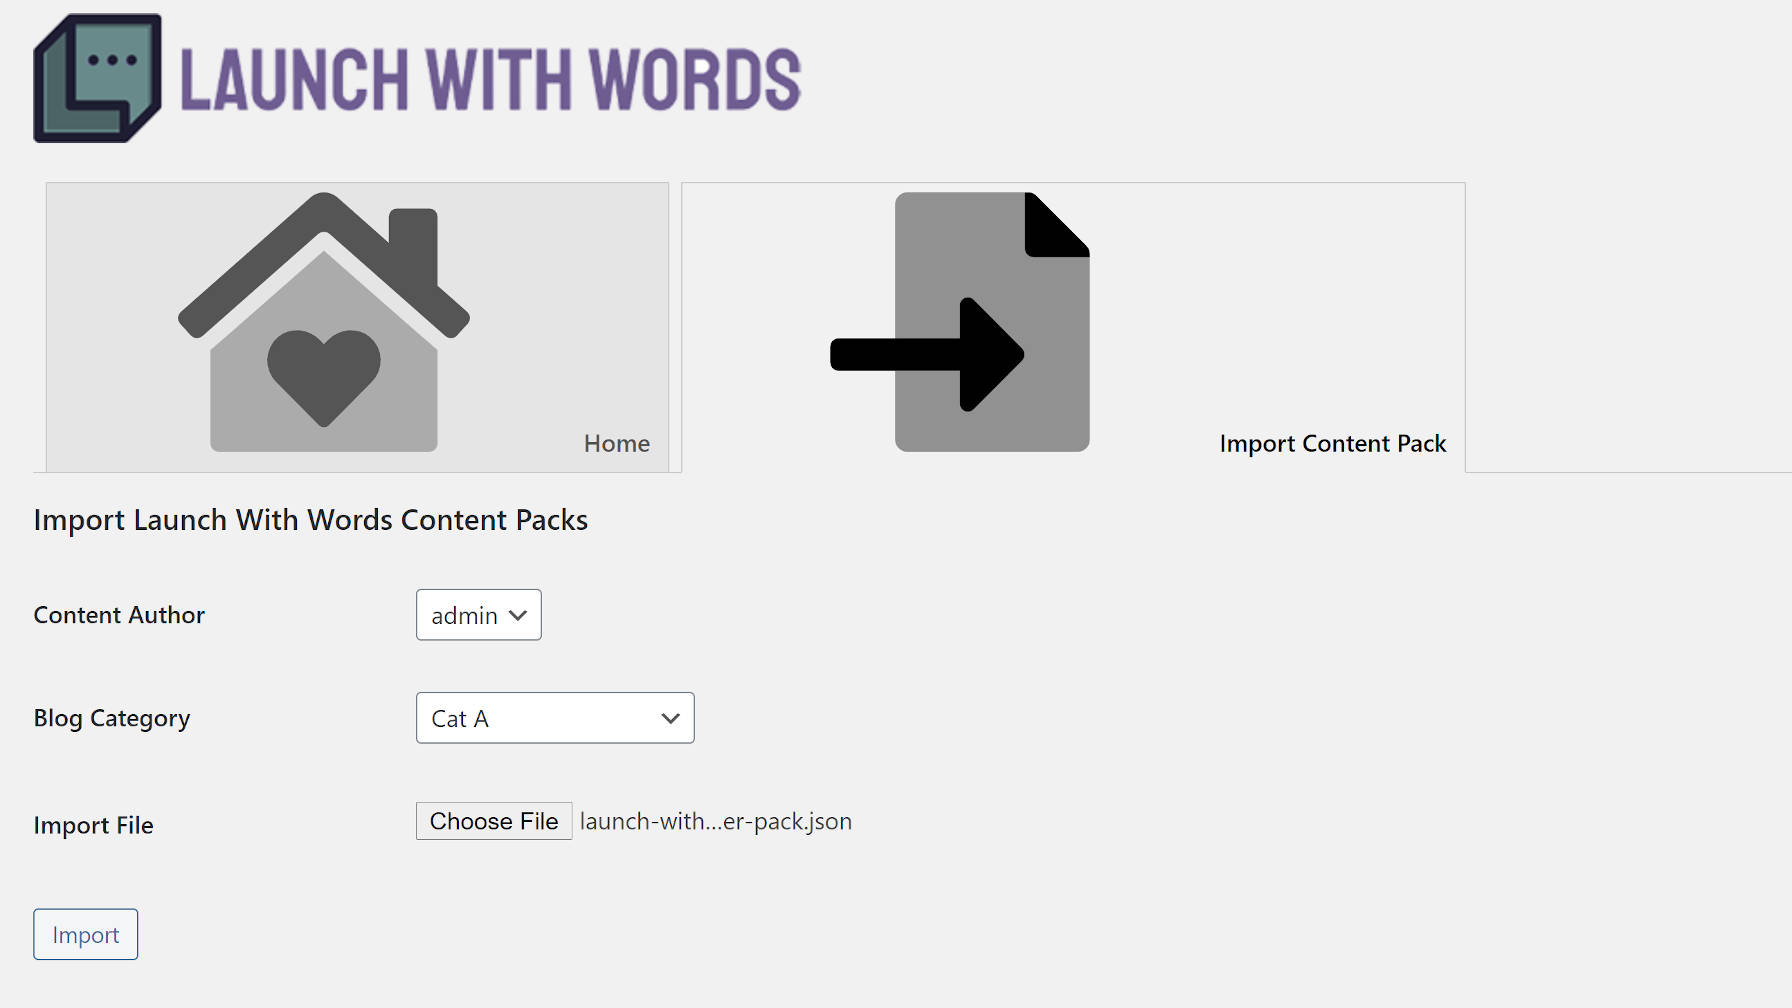 Launch With Words plugin import content pack screen.